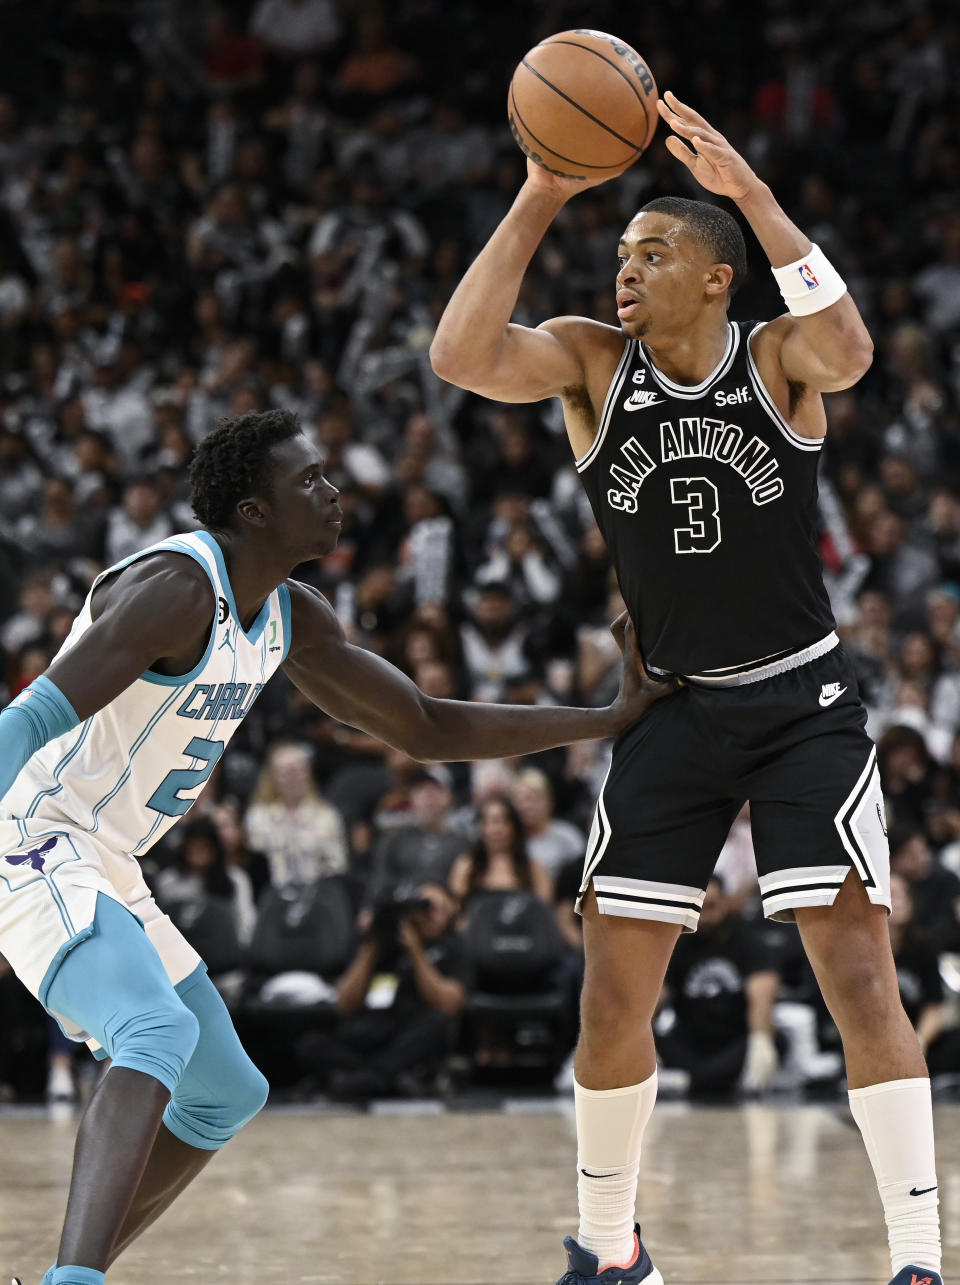 San Antonio Spurs' Keldon Johnson (3) looks to pass as he is defended by Charlotte Hornets' J.T. Thor during the second half of an NBA basketball game, Wednesday, Oct. 19, 2022, in San Antonio. Charlotte won 129-102. (AP Photo/Darren Abate)